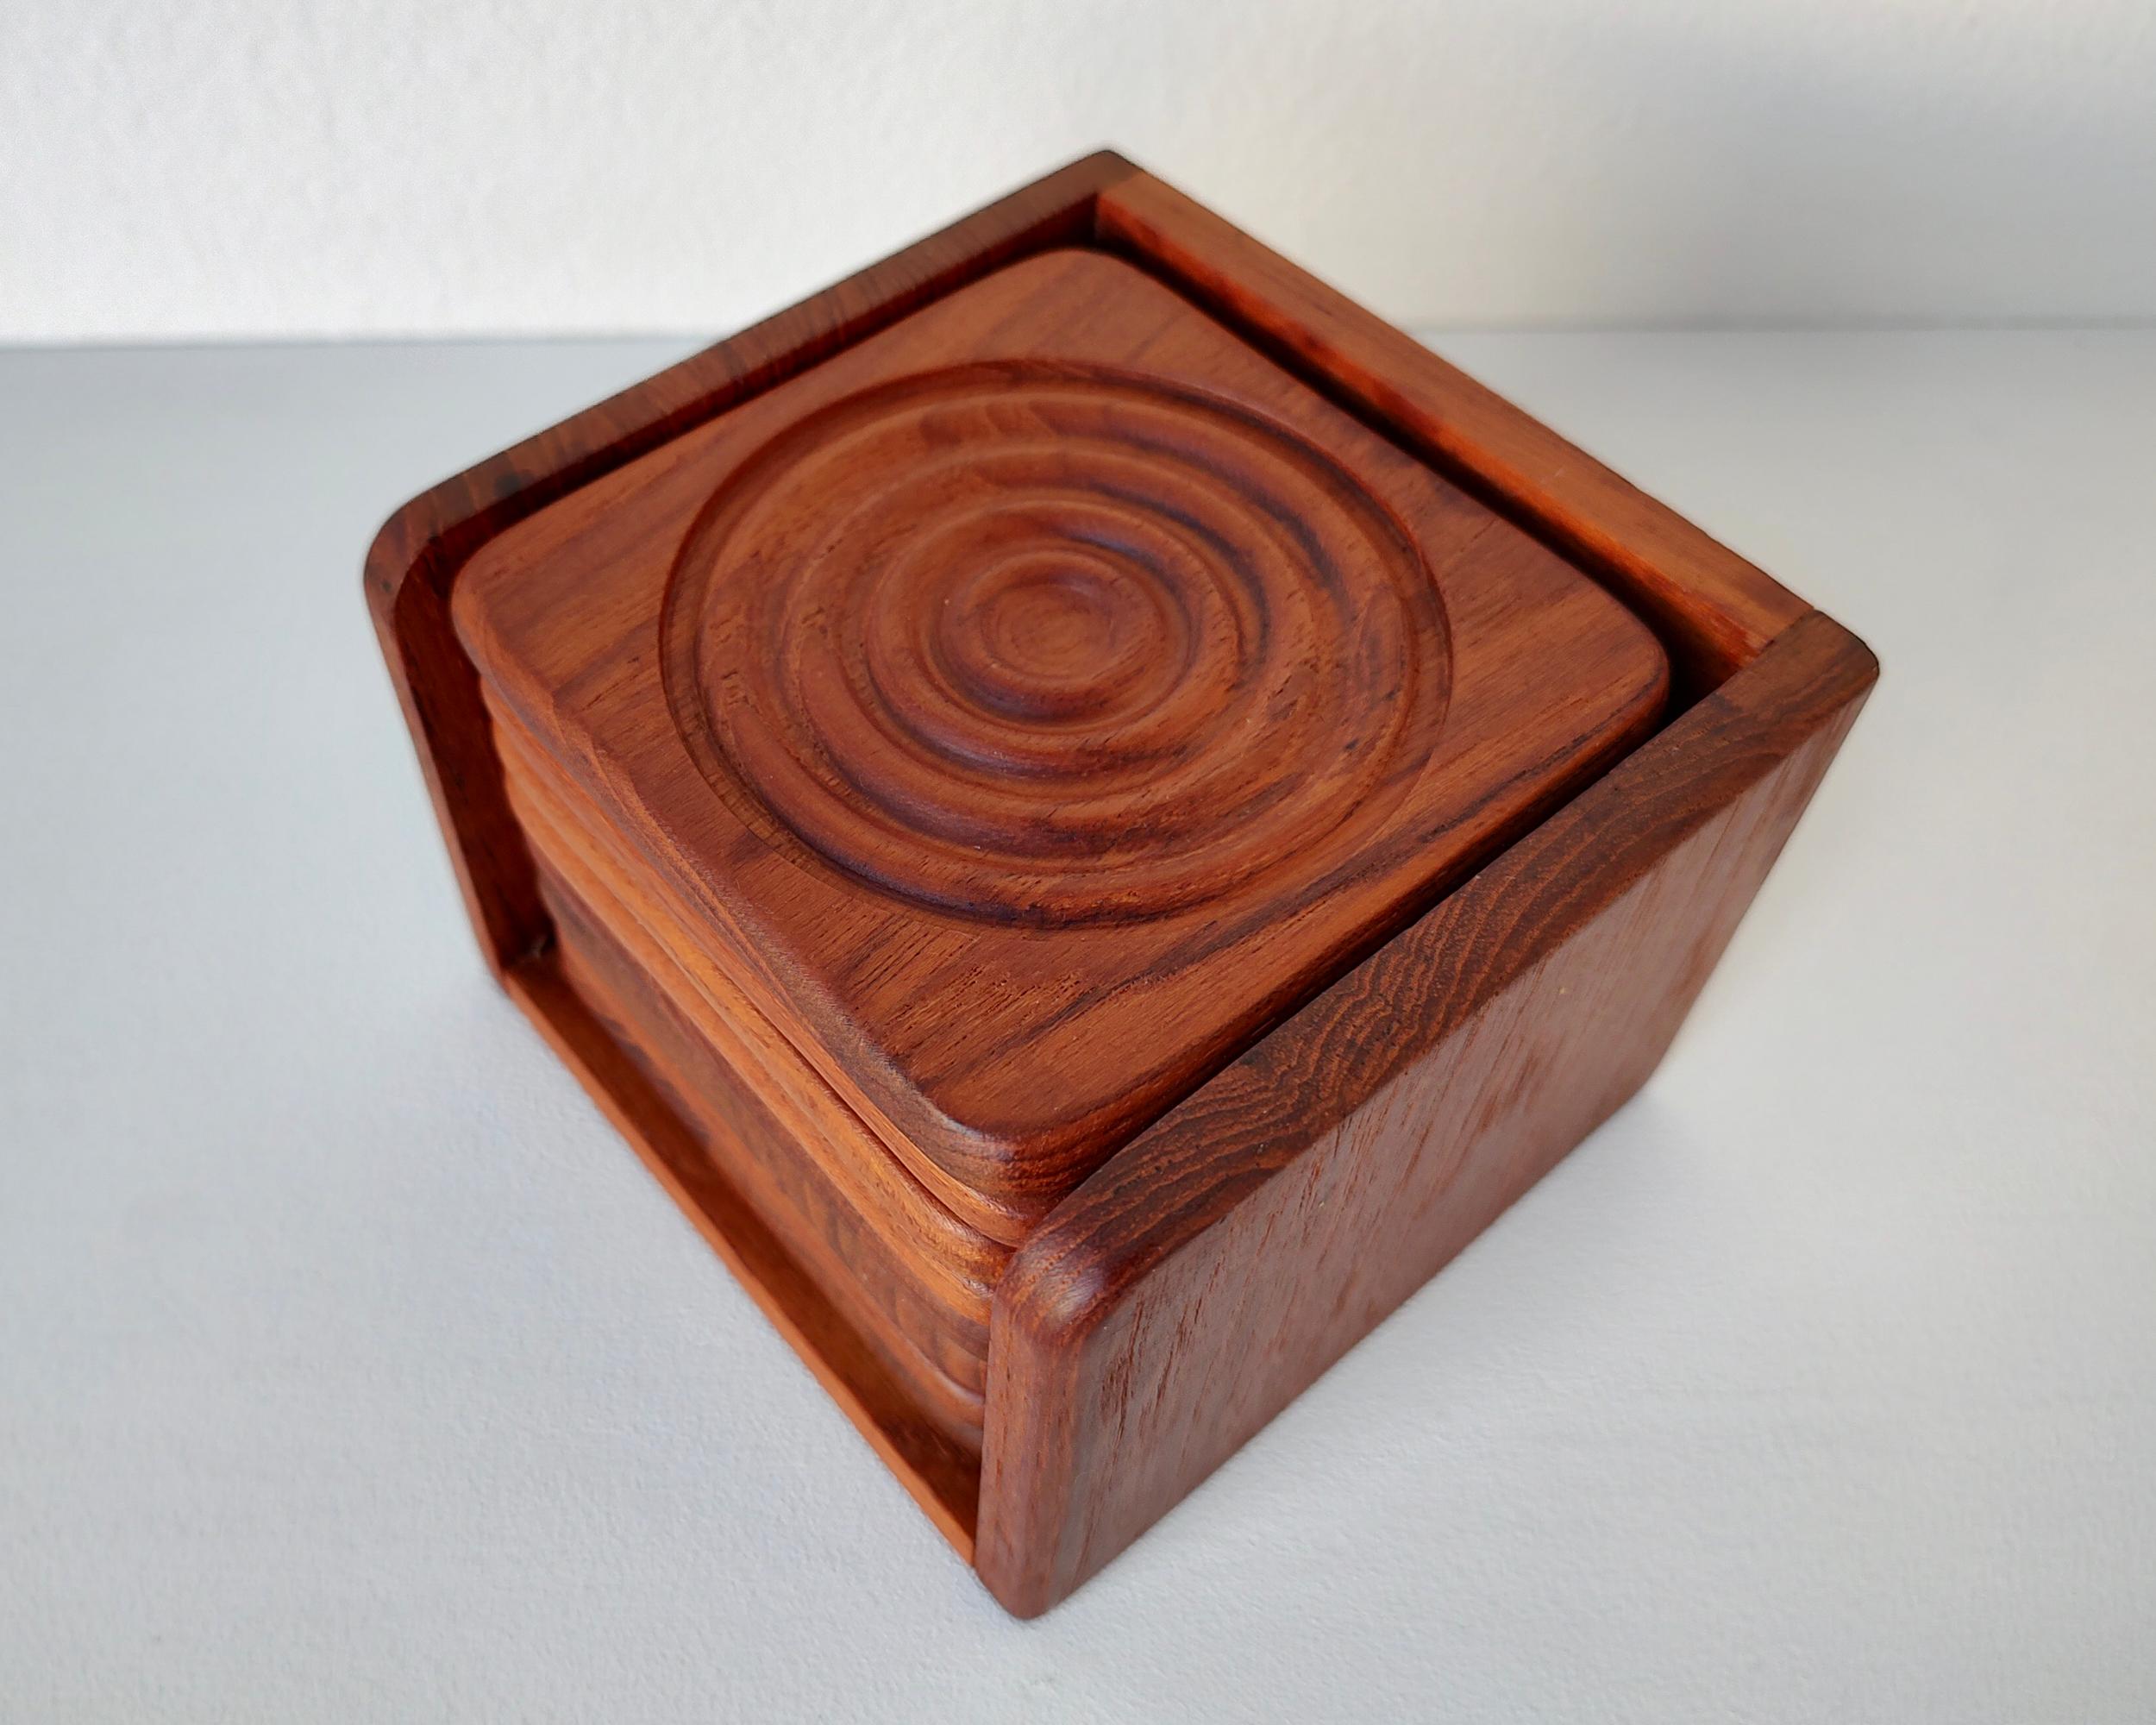 Set of eight (8) solid teak coasters with caddy. Carved ripple pattern catches condensation and prevents glasses from getting stuck to the coaster. Wood has been conditioned, light wear consistent with vintage age.